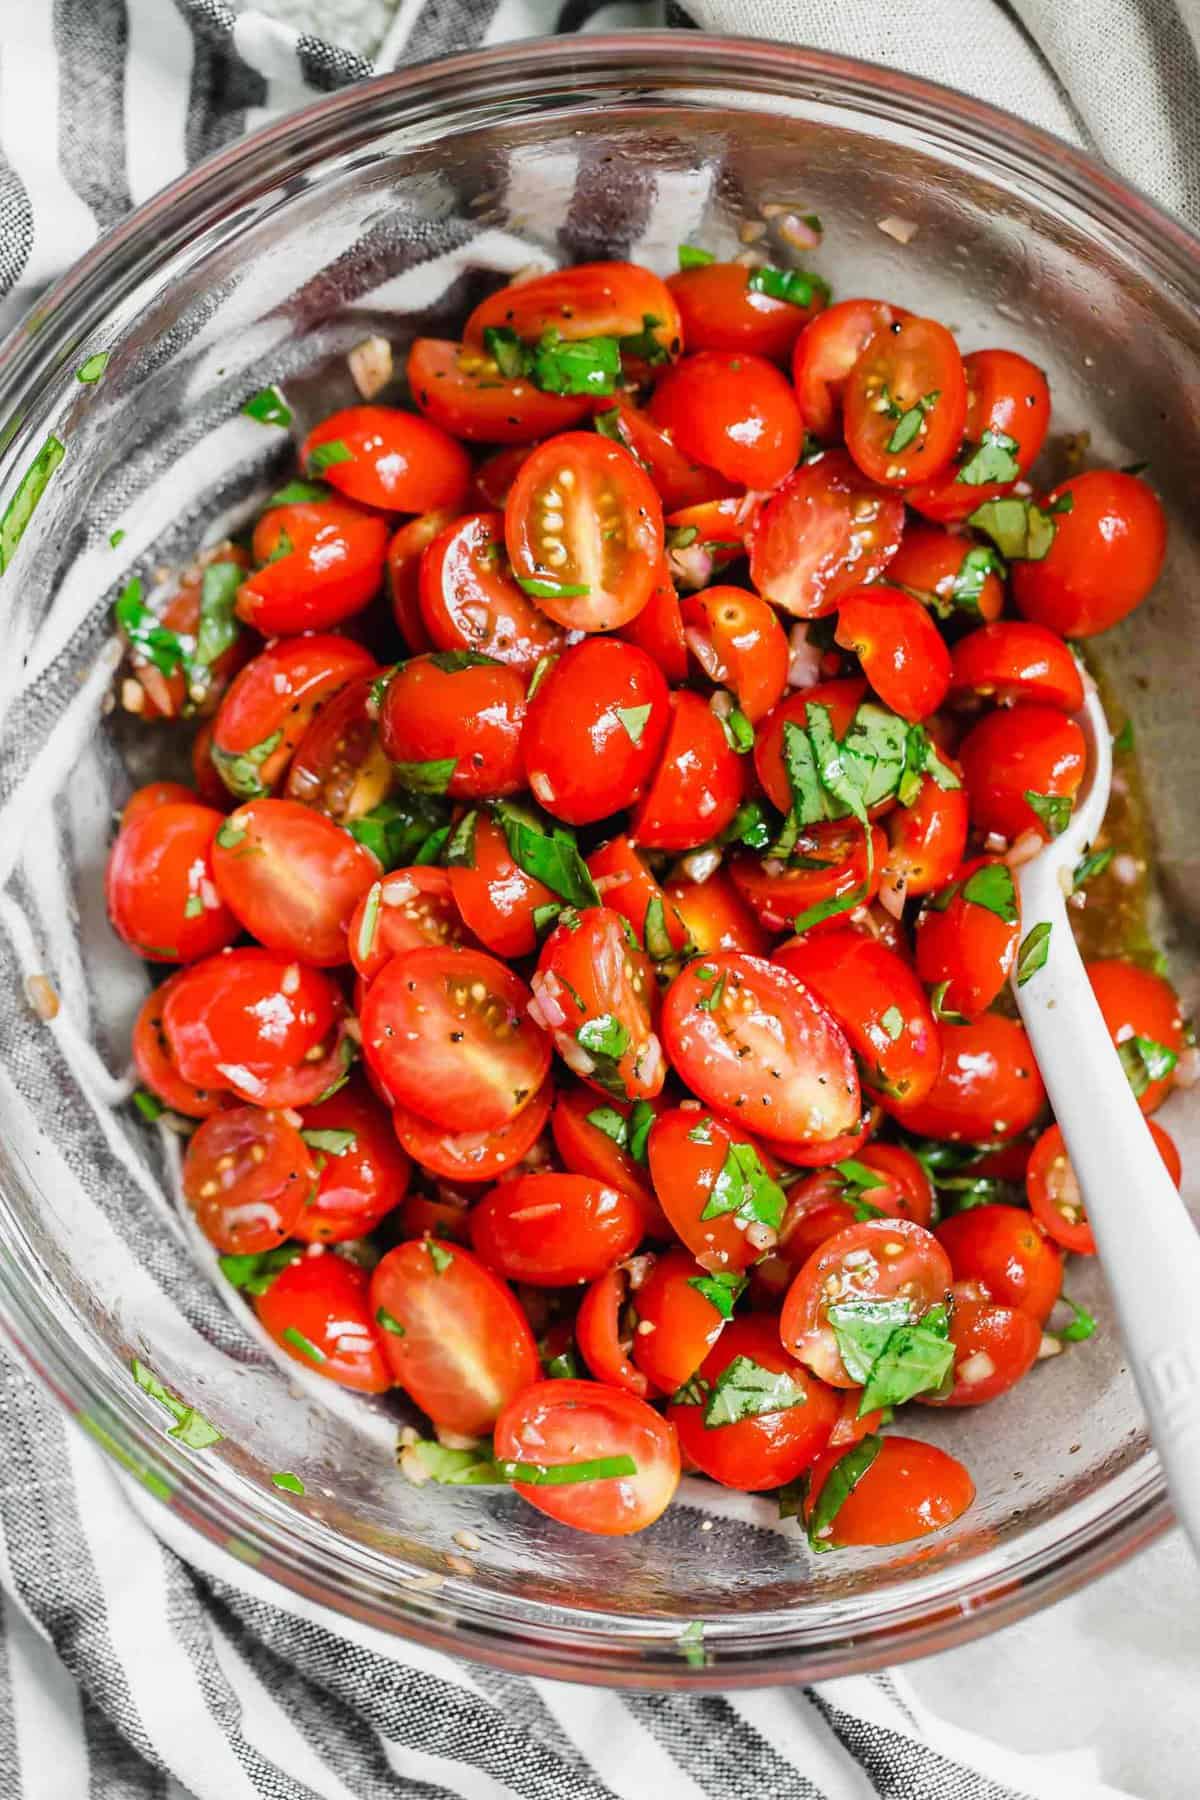 This is the best summer tomato salad! With a short ingredient list, this fresh salad will have you making it all summer long! #tomato #tomatosalad #summersalad #freshingredients